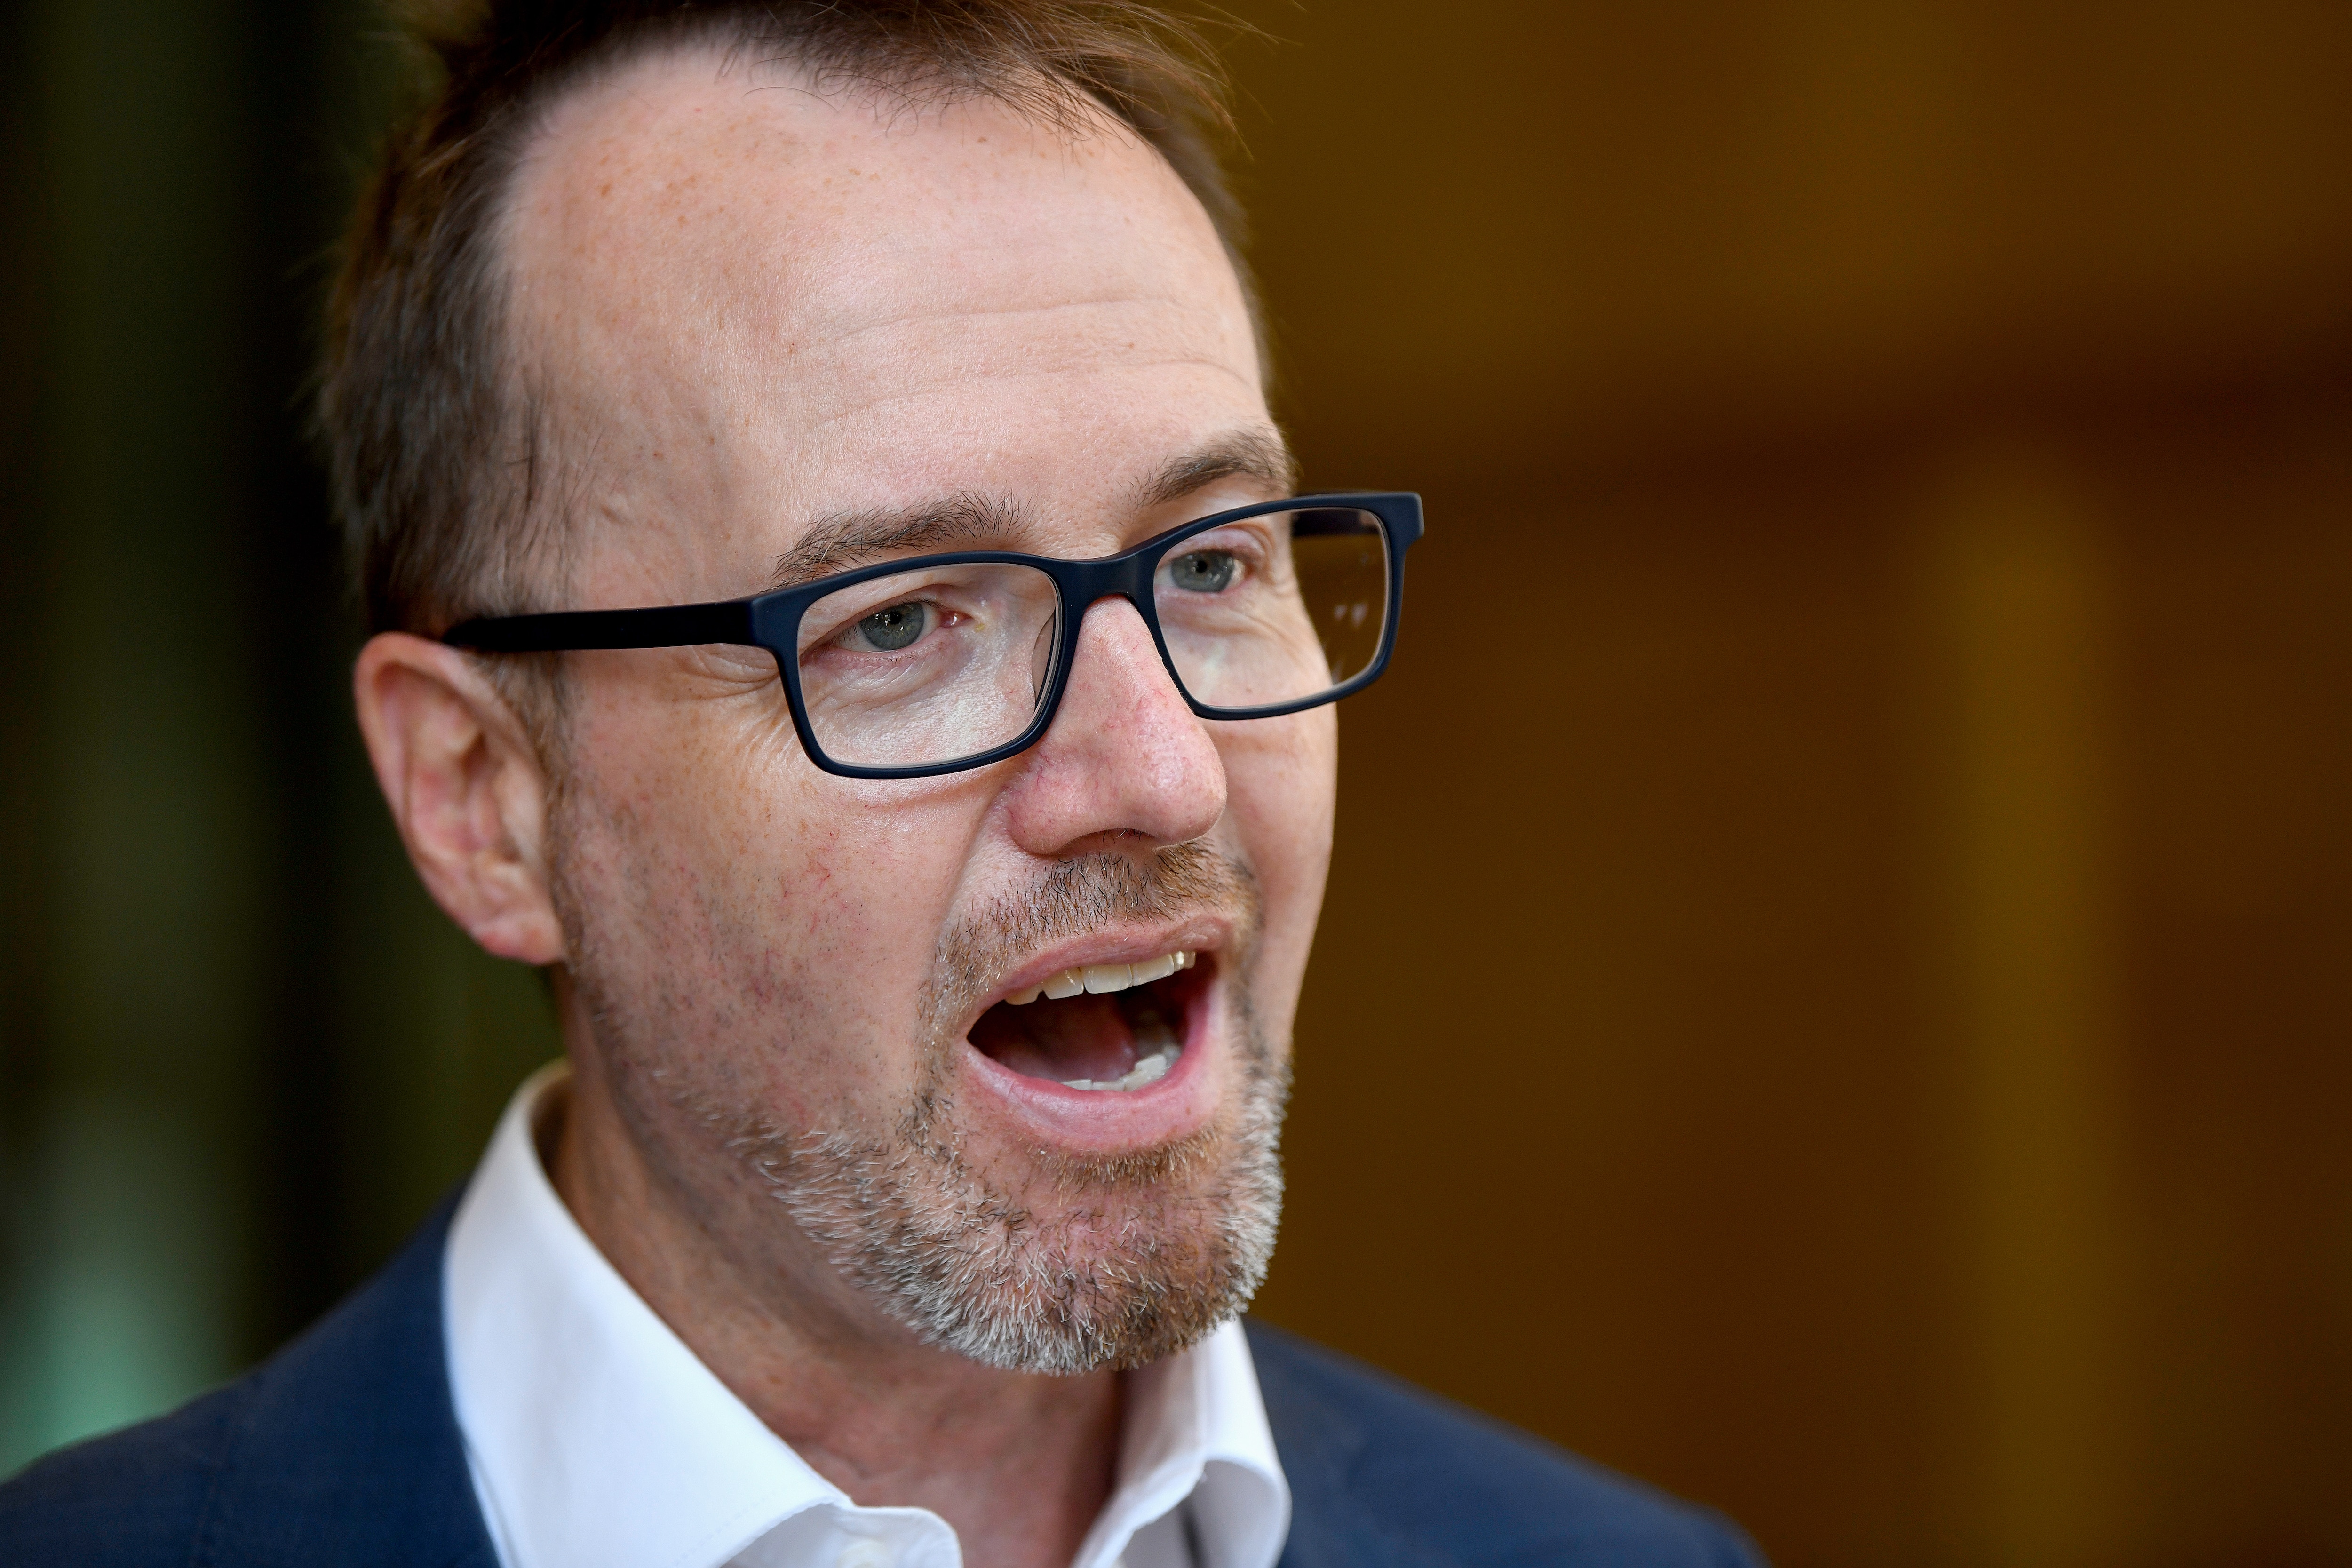 NSW Greens MP David Shoebridge speaks to the media outside Downing Centre Local Court in Sydney, Friday, January 31, 2020. (AAP Image/Bianca De Marchi) NO ARCHIVING